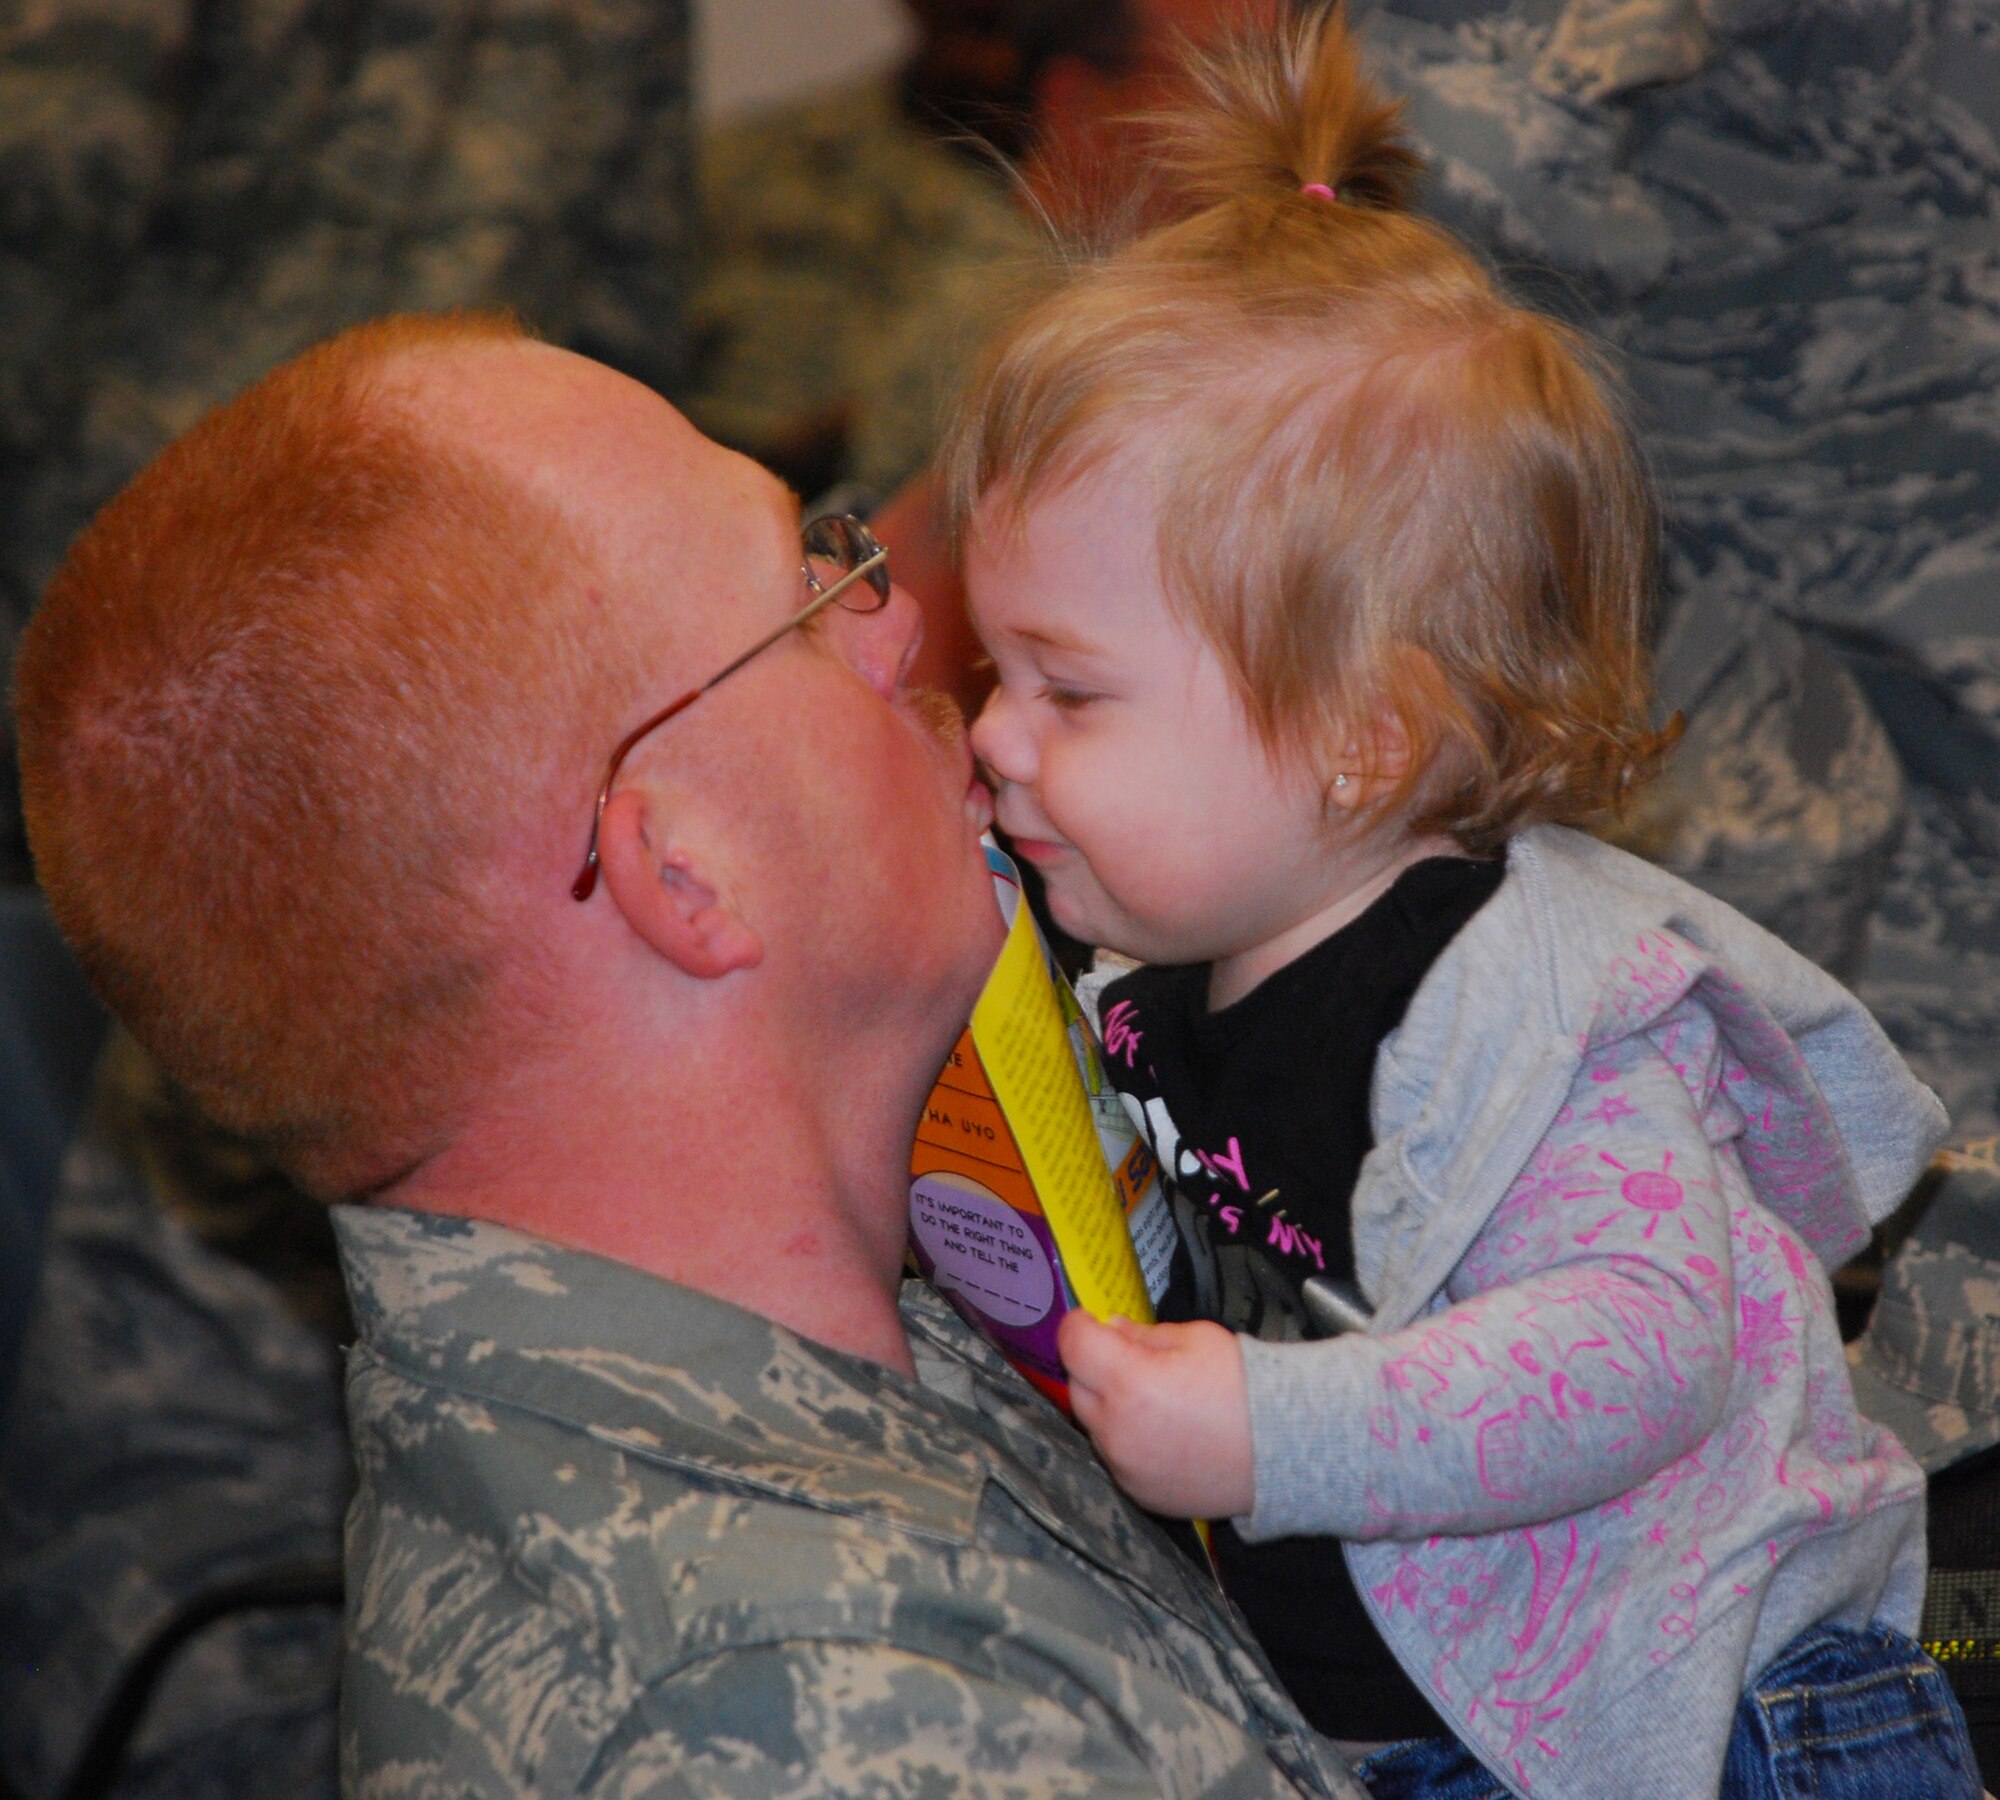 Tech. Sgt. Rodney Pollard, 301st Aircraft Maintenance Squadron, gets some sugar from his daughter before leaving today for Southwest Asia. More than 100 301st Fighter Wing troops have deployed in support of Operation Iraqi Freedom and will return in the spring. (U.S. Air Force Photo/Tech. Sgt. Julie Briden-Garcia)